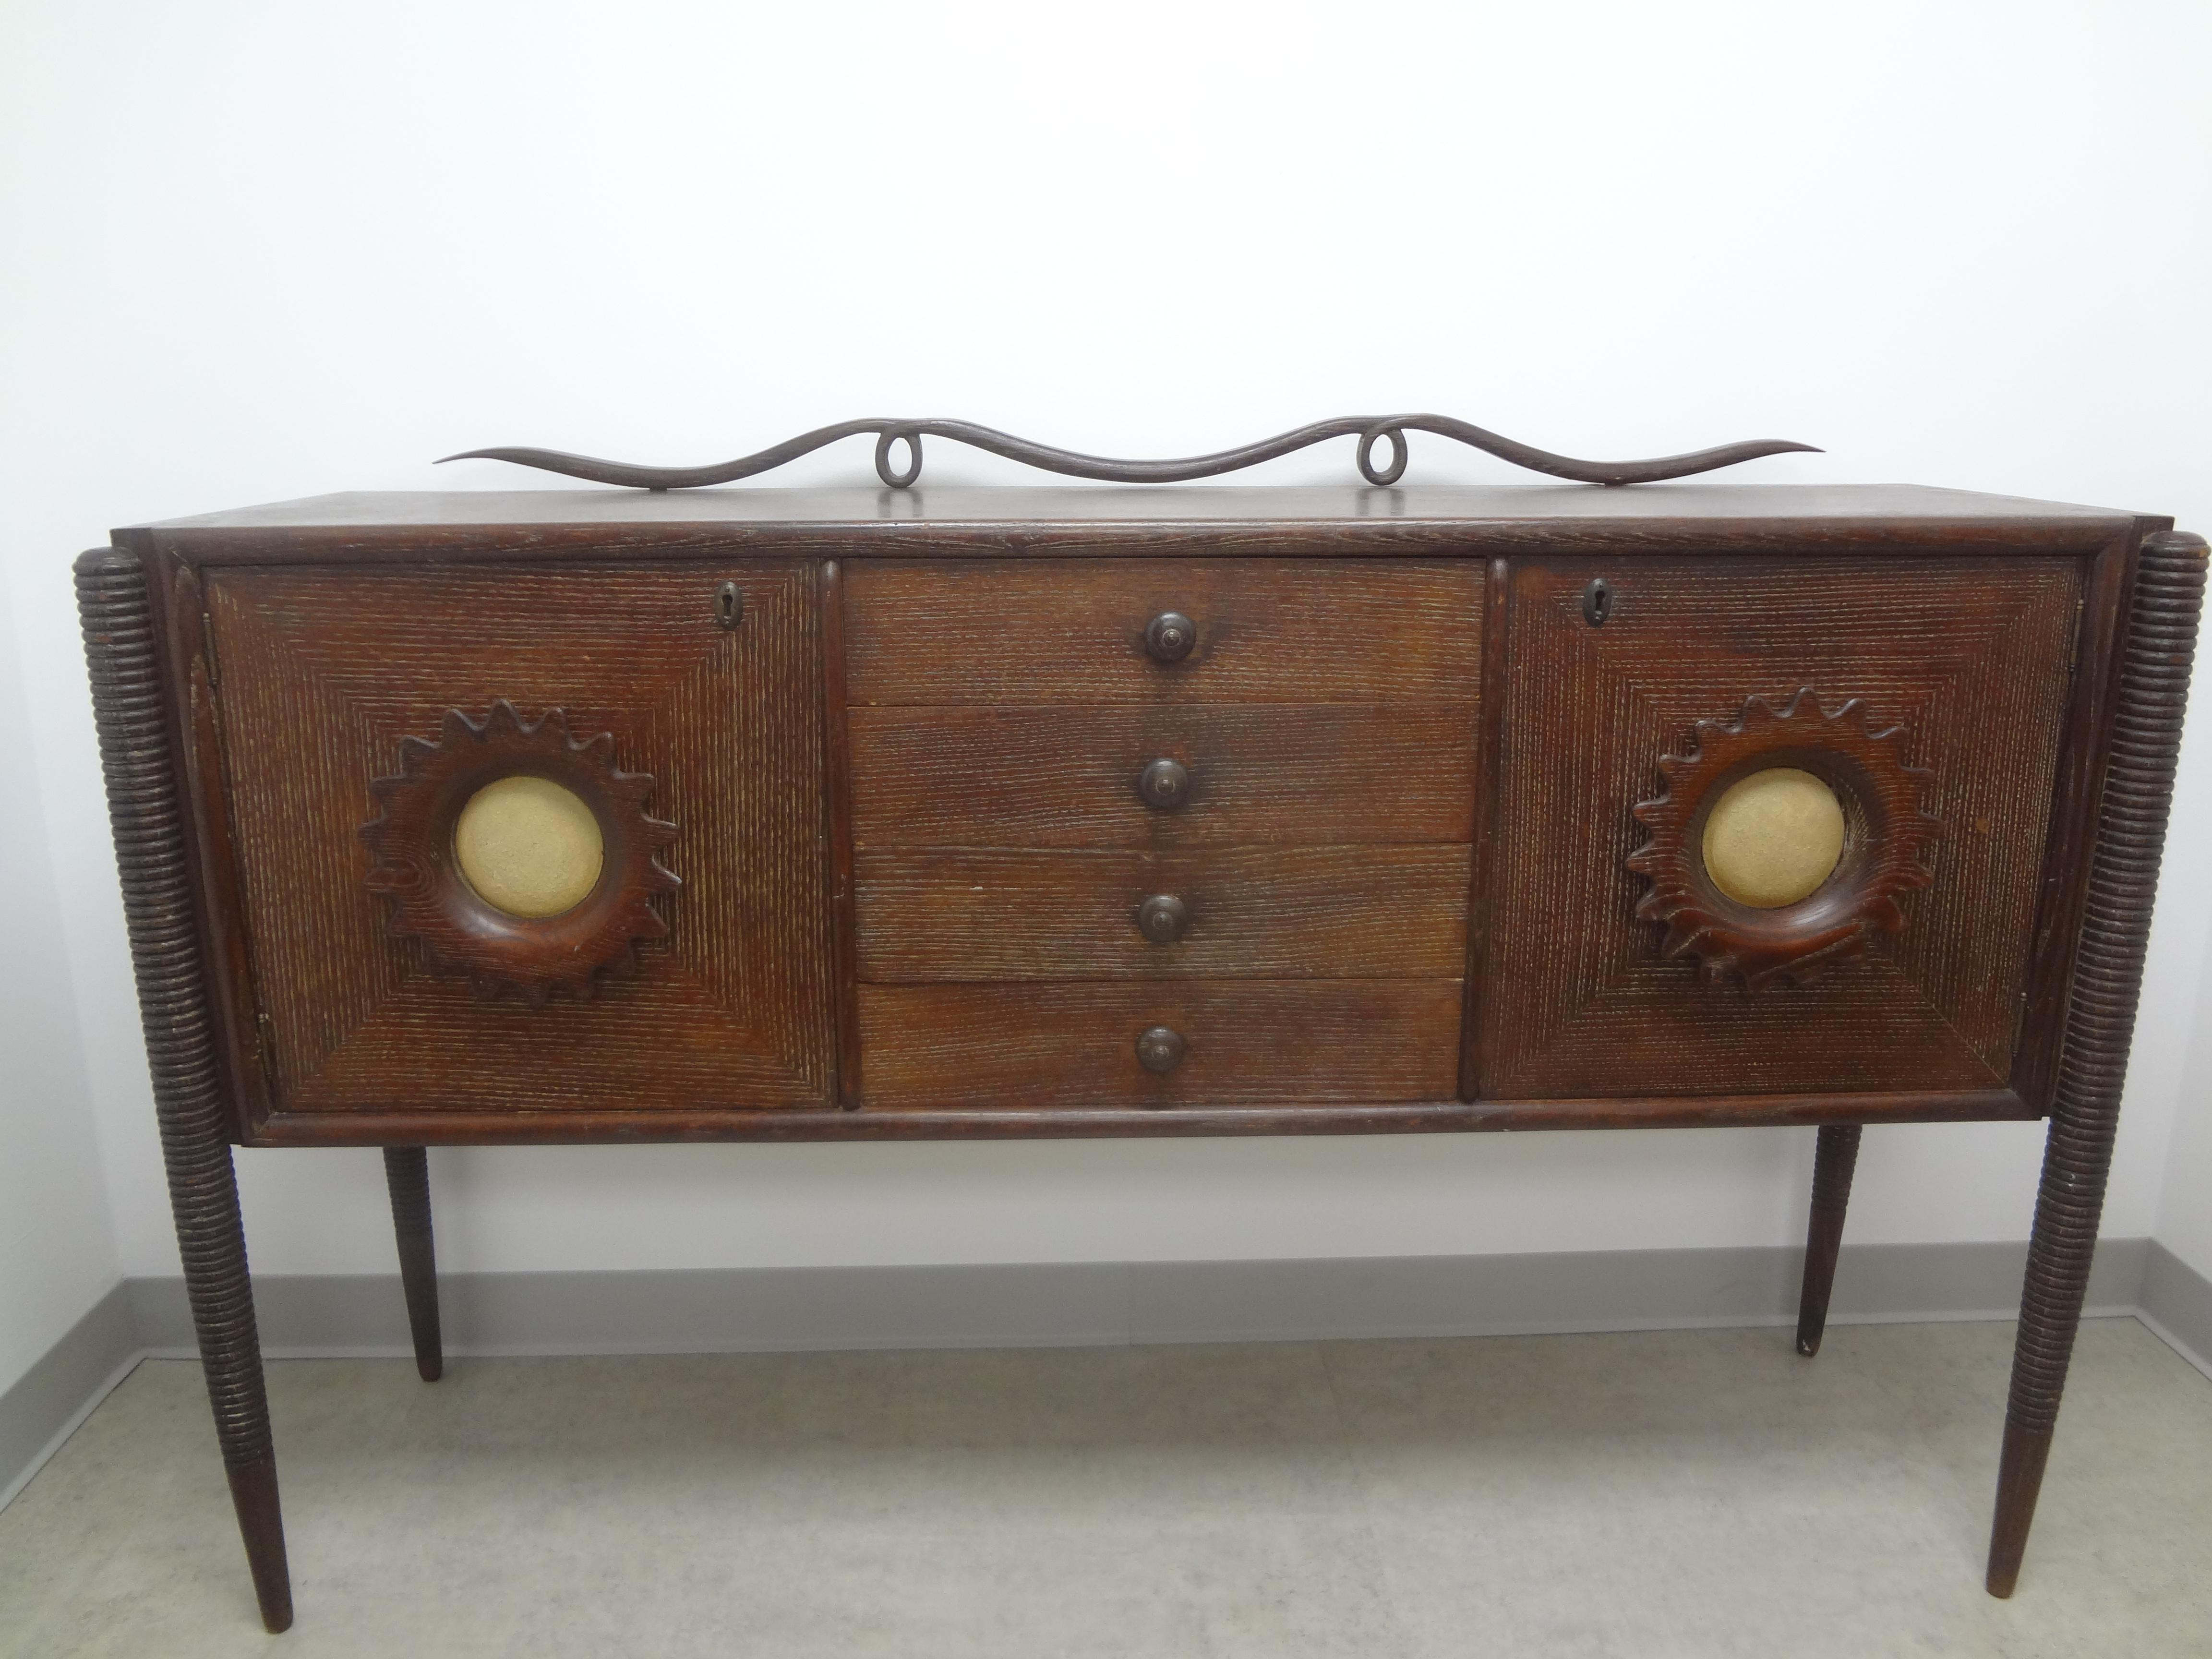 Italian Modern credenza attributed to Paolo Buffa. This stunning Italian Mid-Century organic Modern Cerused piece can be used as a credenza, console, sideboard, cabinet, bar or buffet and dates to the 1950s. This lovely Italian Mid-Century Modern